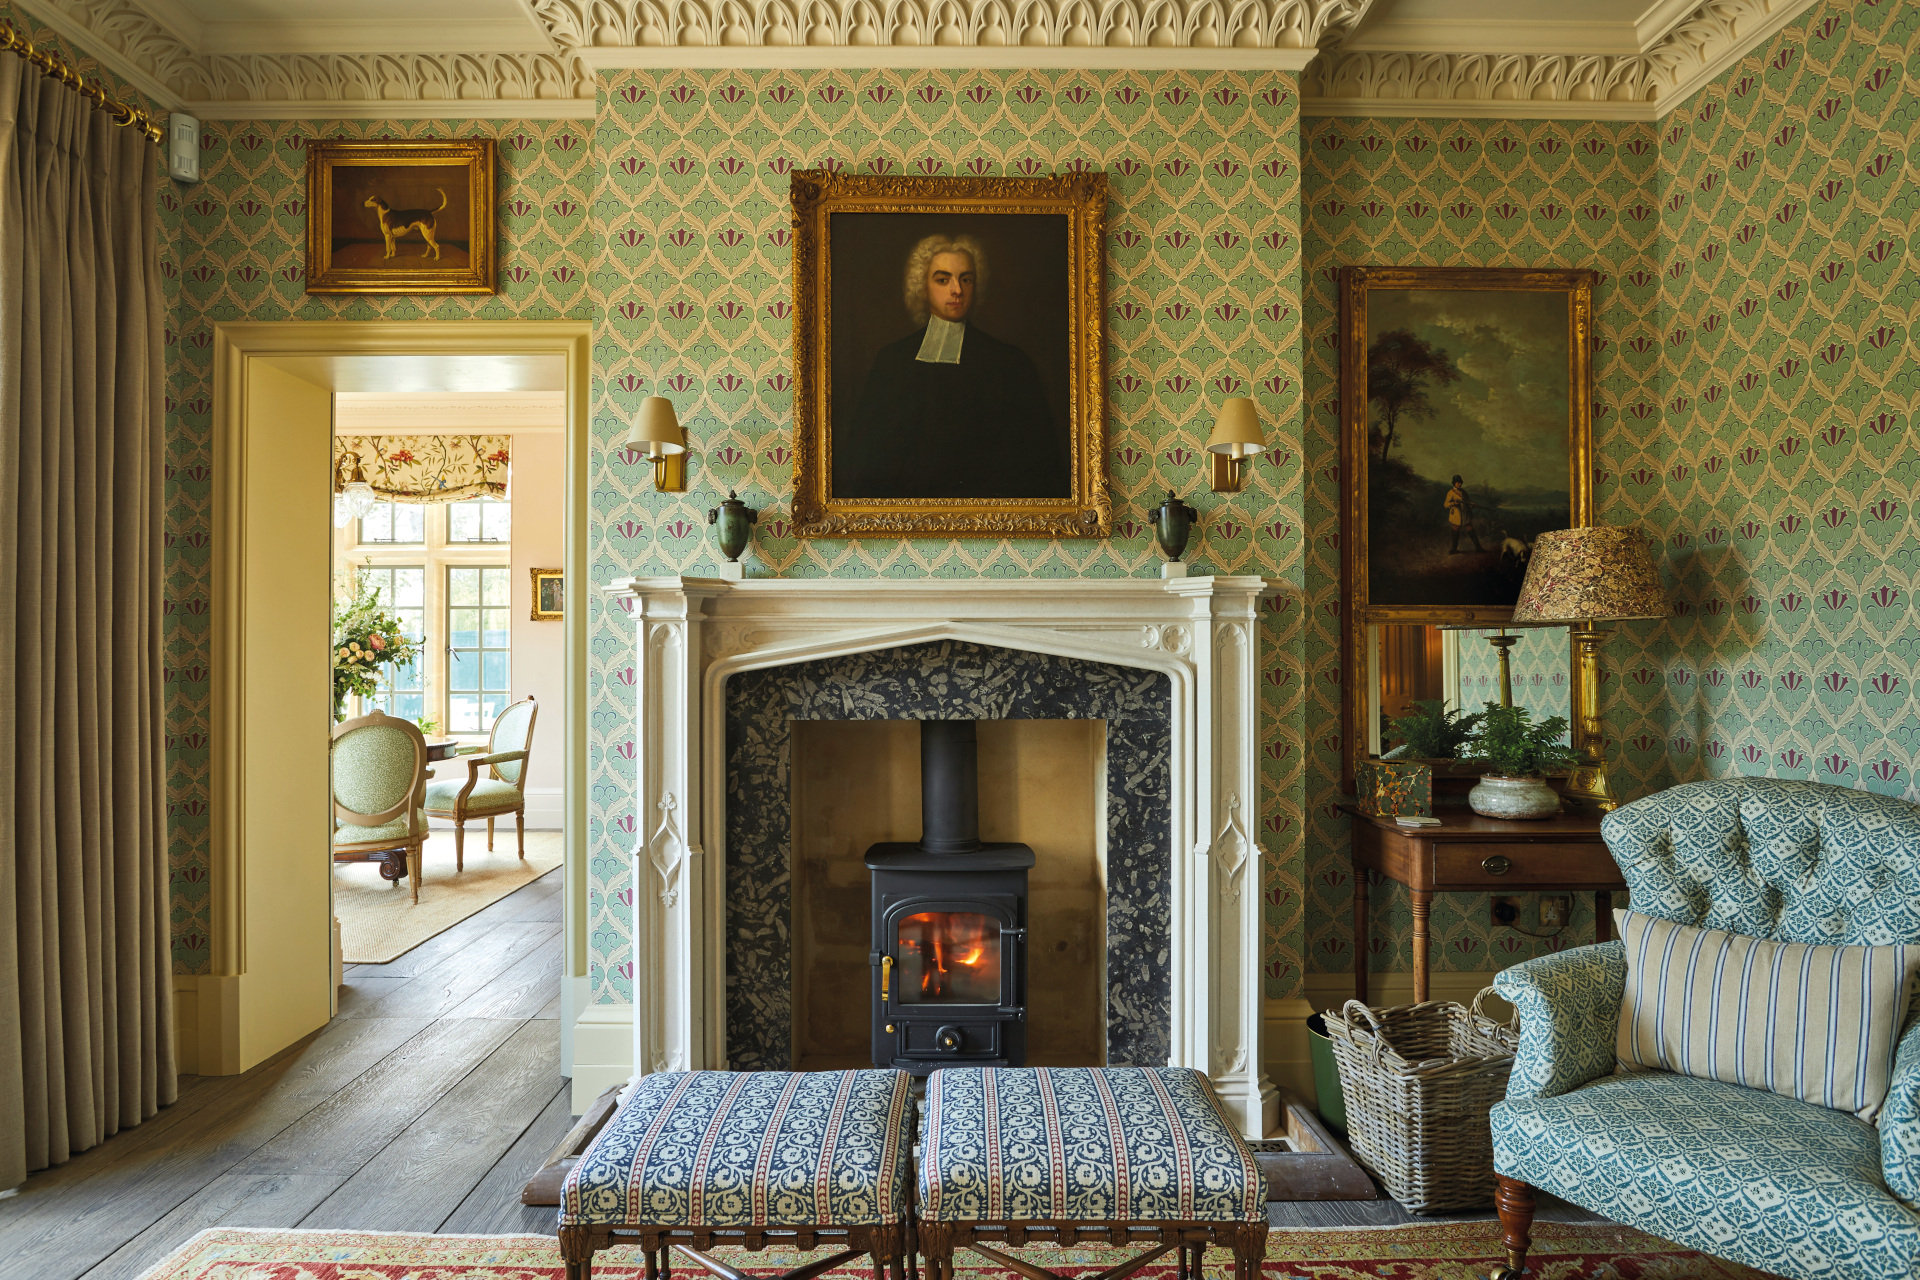 Wallpapered sitting room with country fireplace